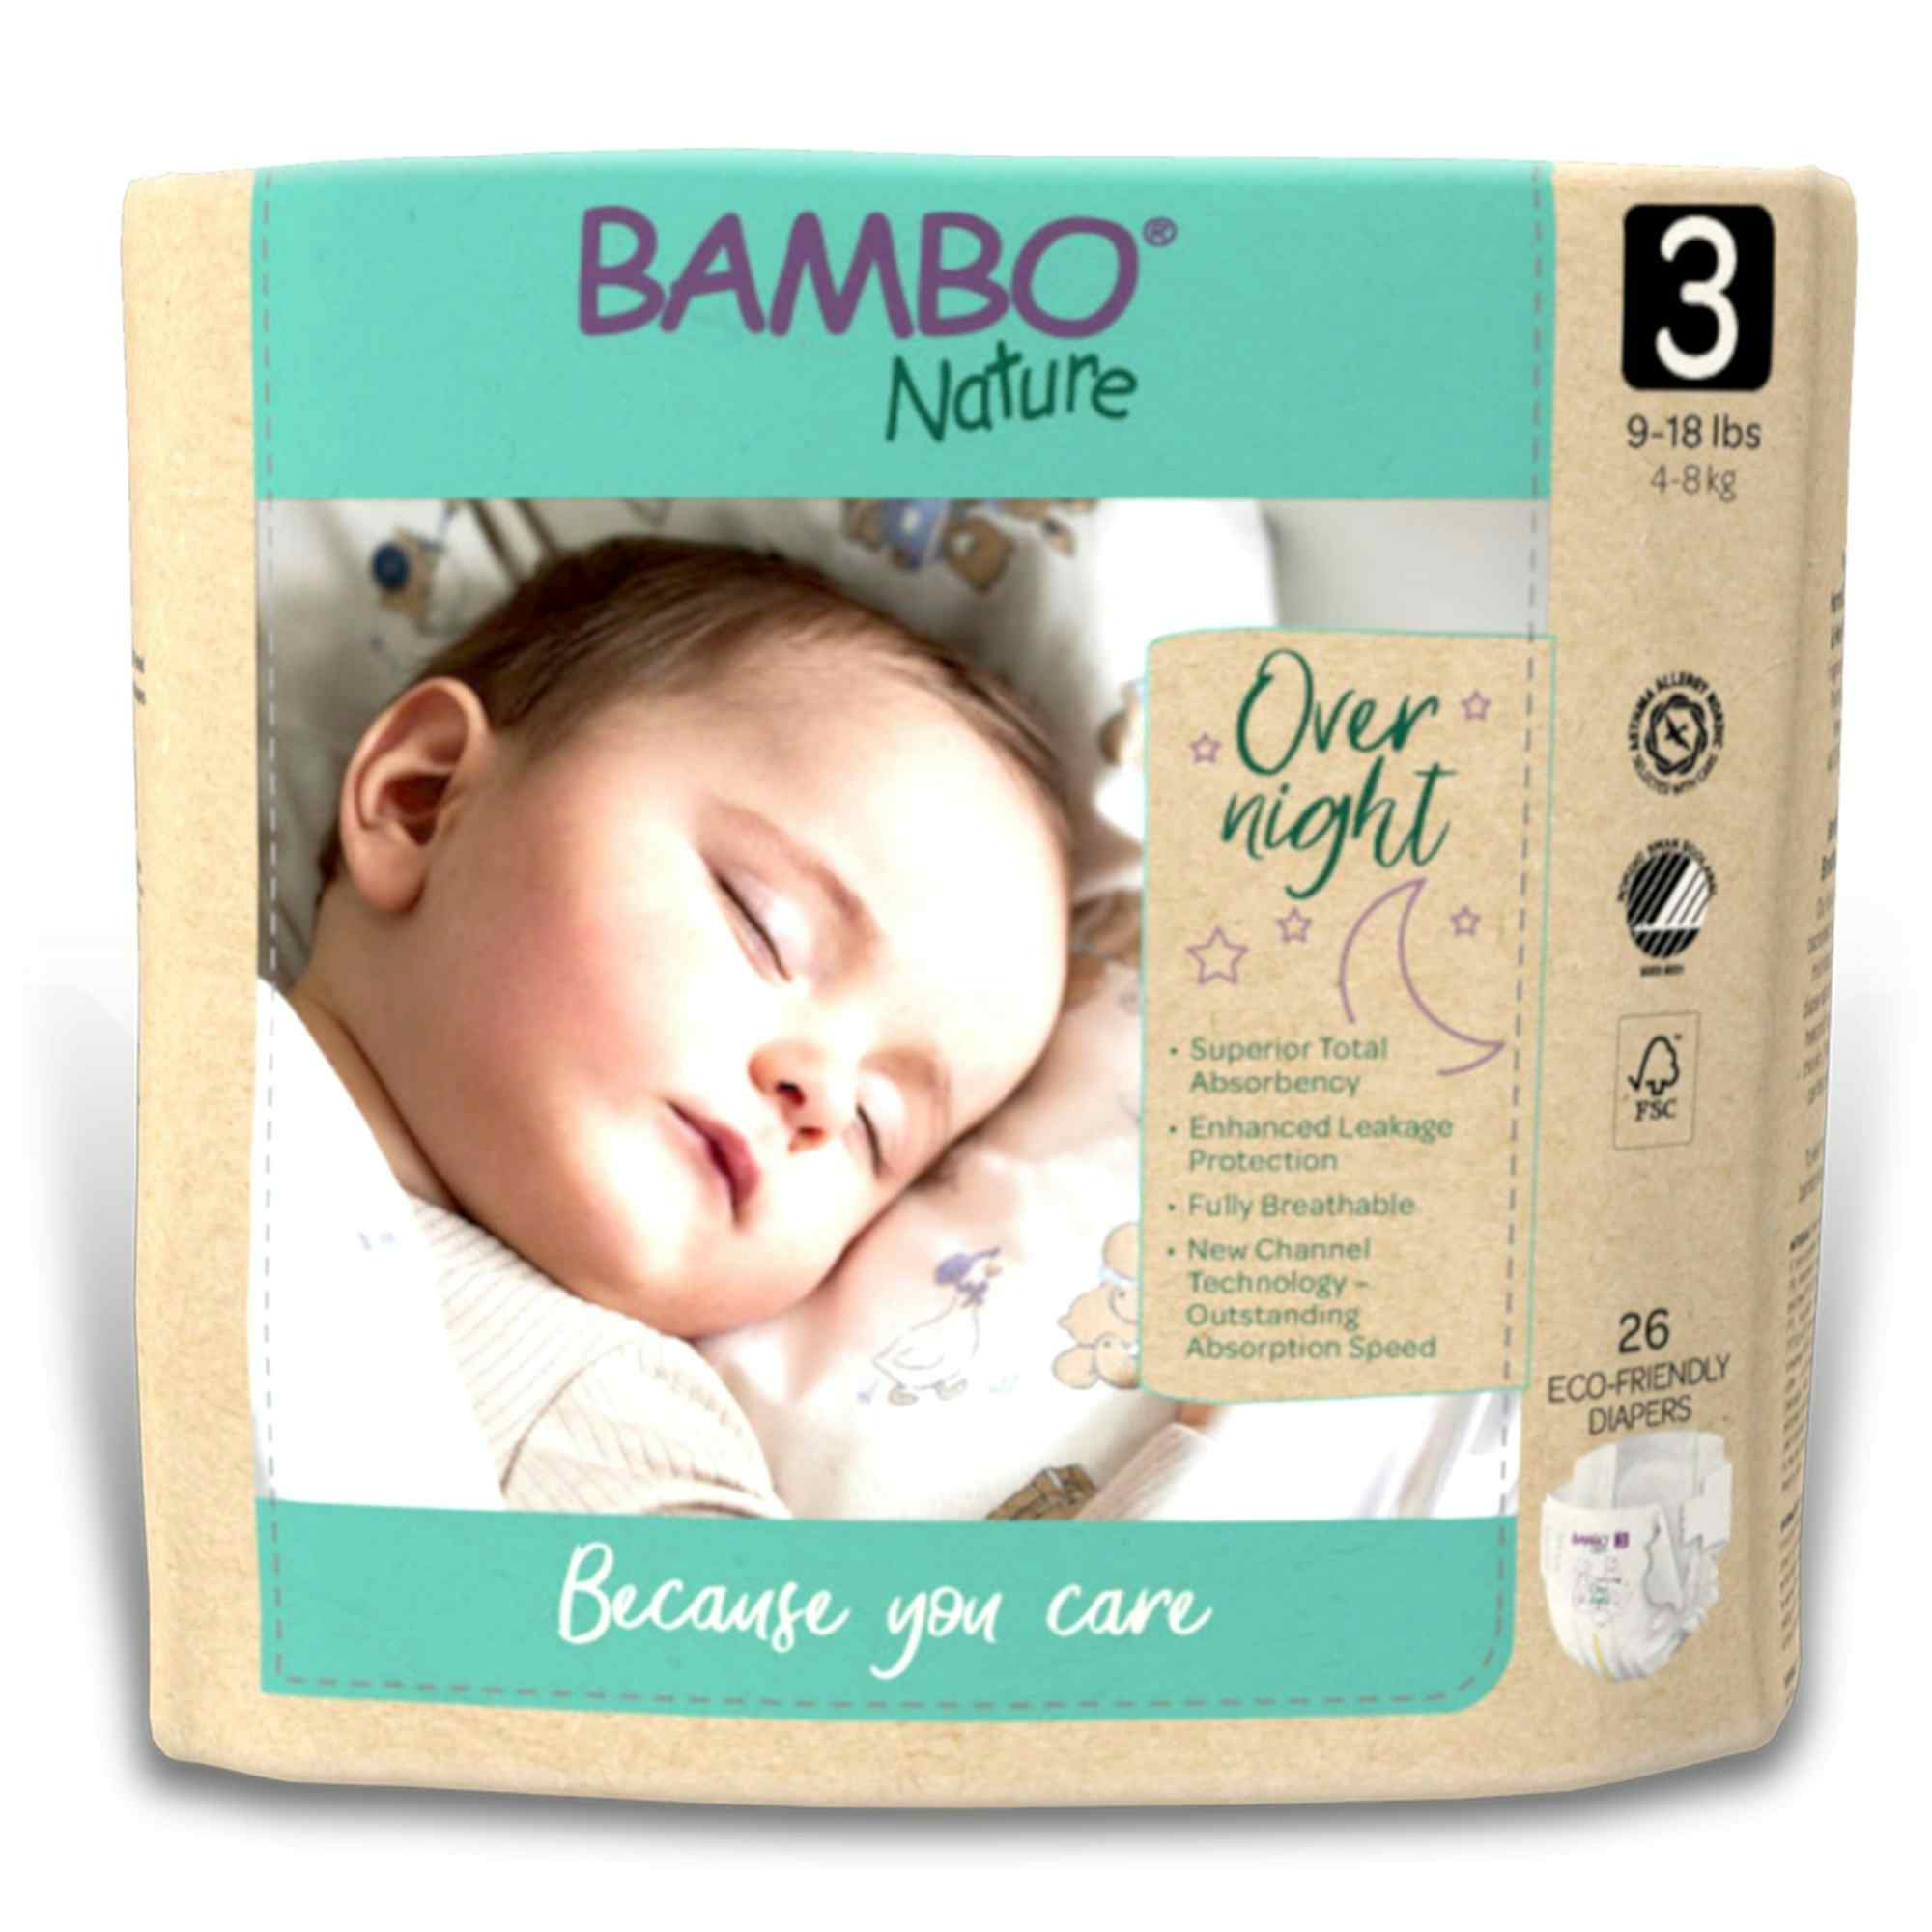 Bambo Nature Overnight Baby Diapers with Tabs, Heavy Absorbency, 1000021009, Size 3 (9 to 18 lbs.) - Case of 104 